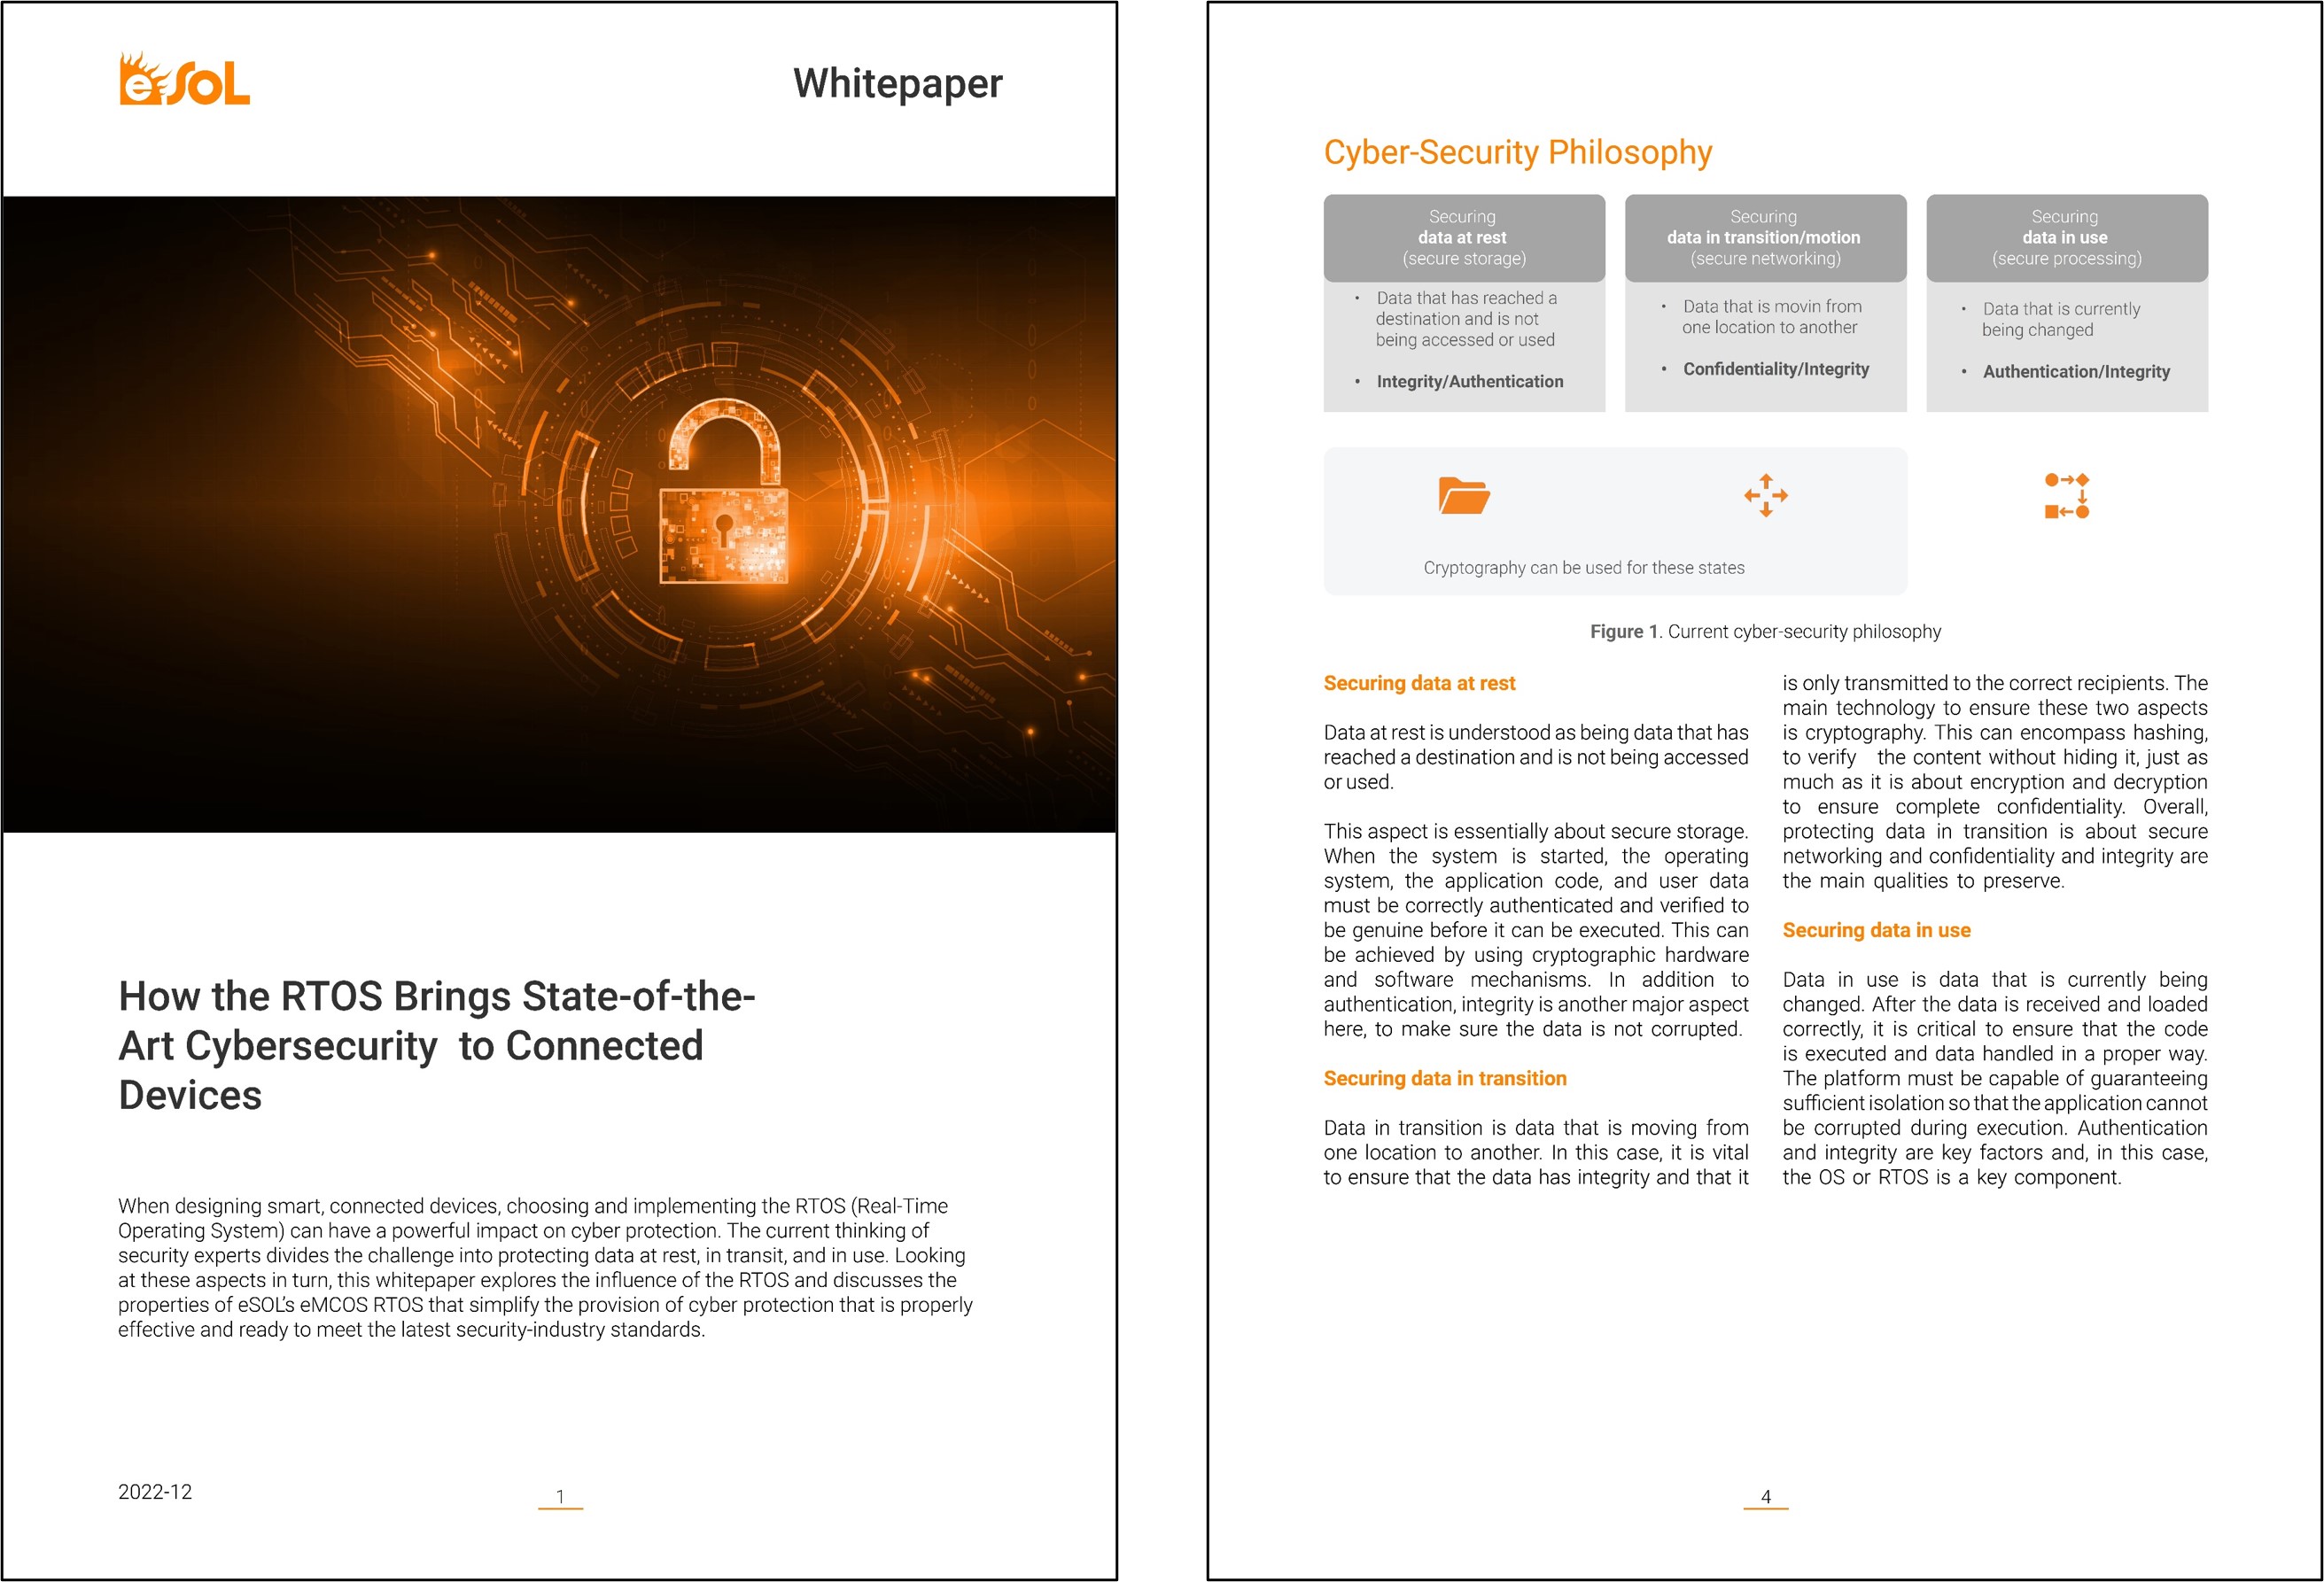 Whitepaper: How the RTOS Brings State-of-the-Art Cybersecurity to Connected Devices